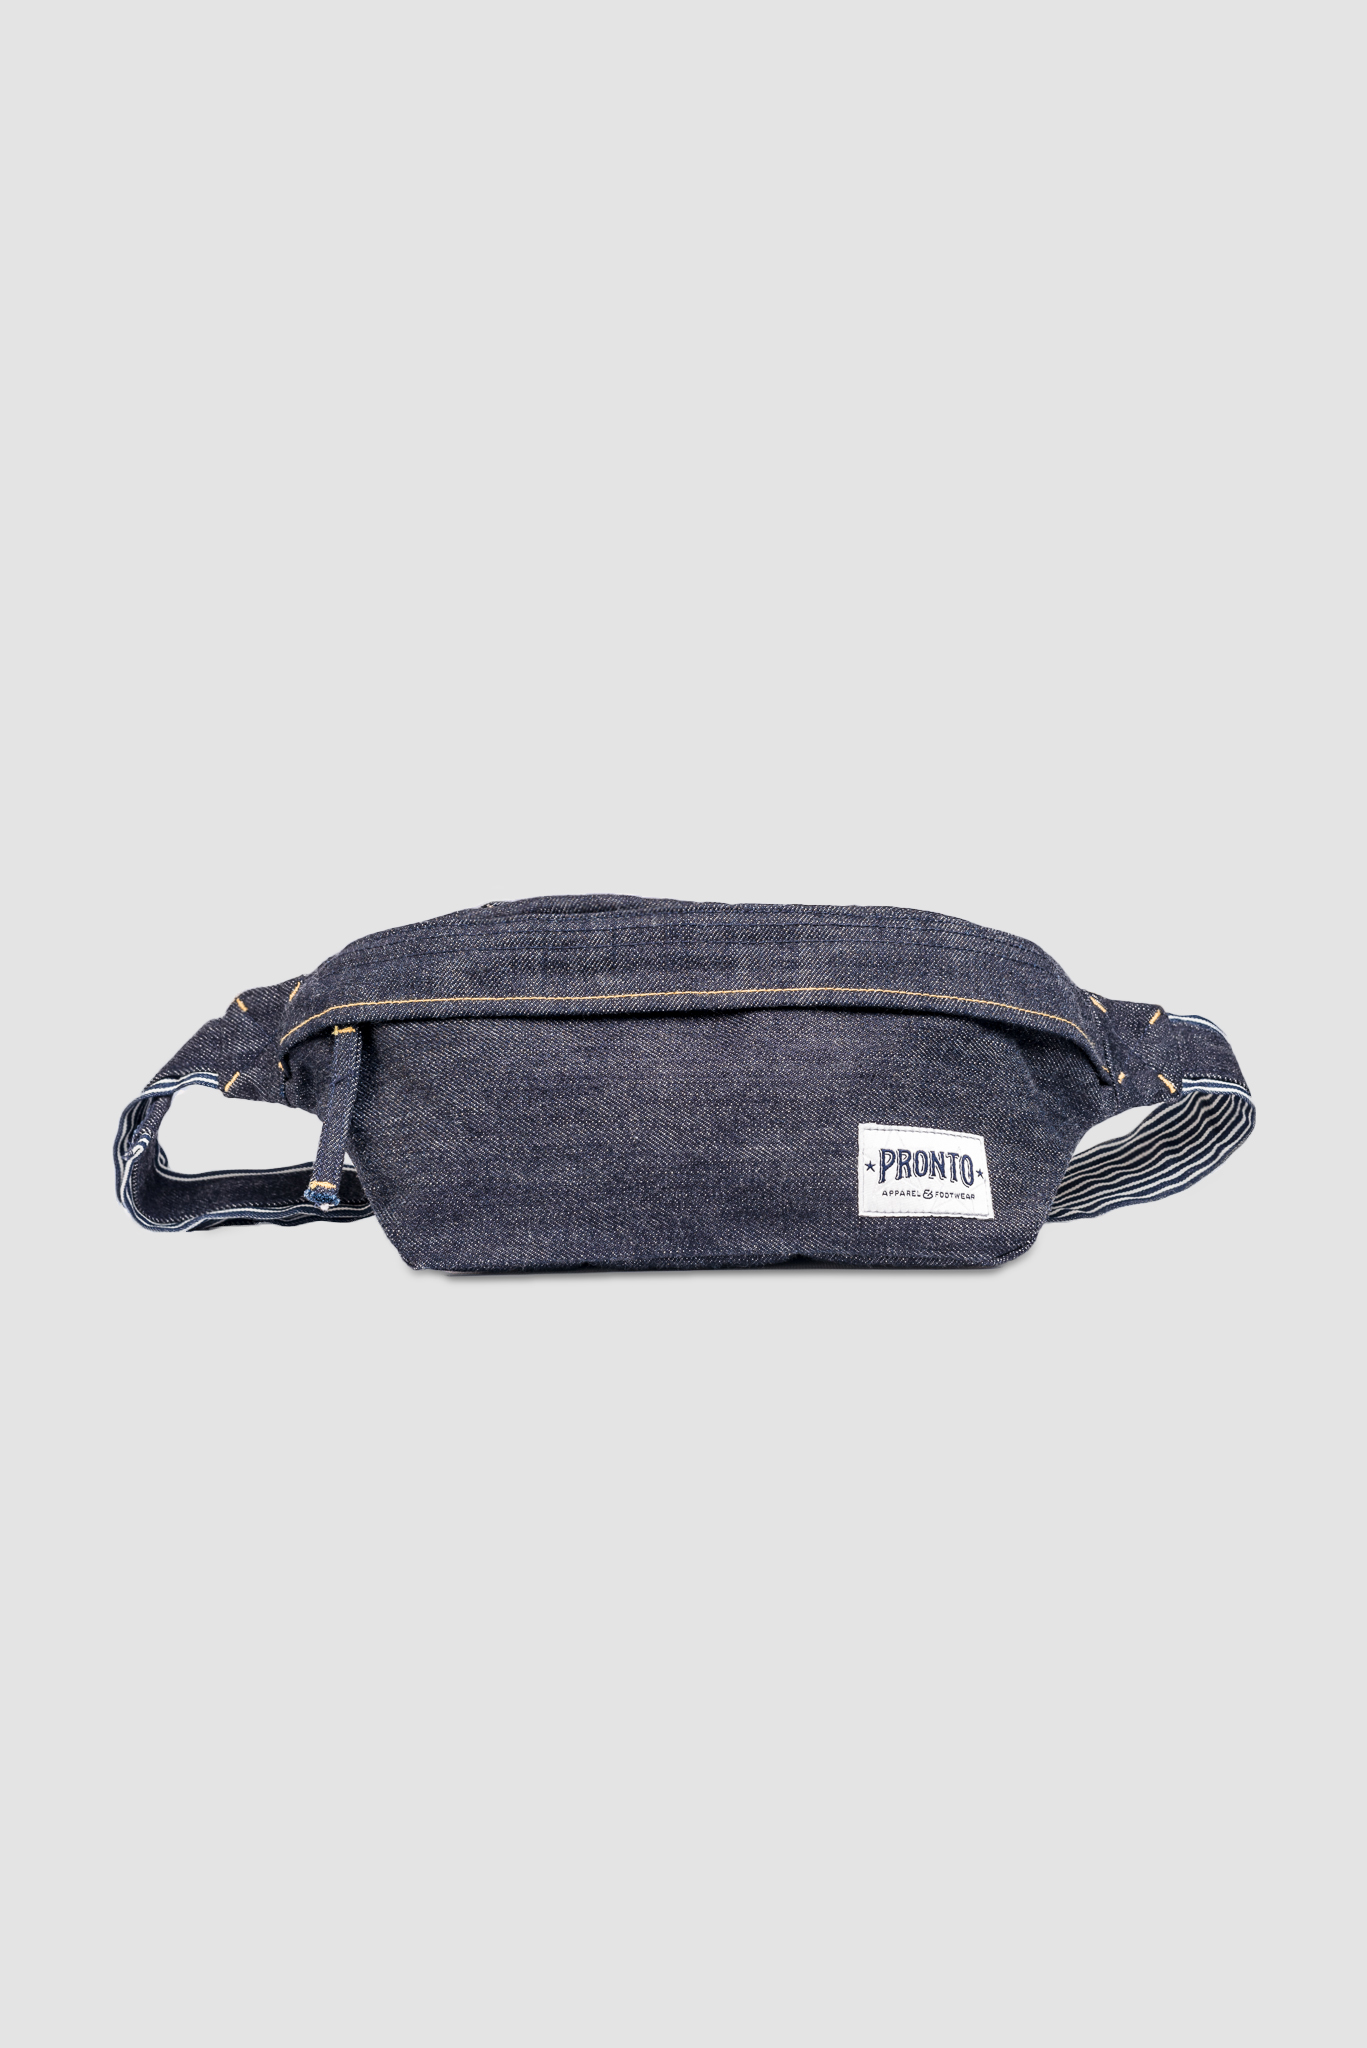 NEW ARRIVAL : PRONTO CYCLING BAG